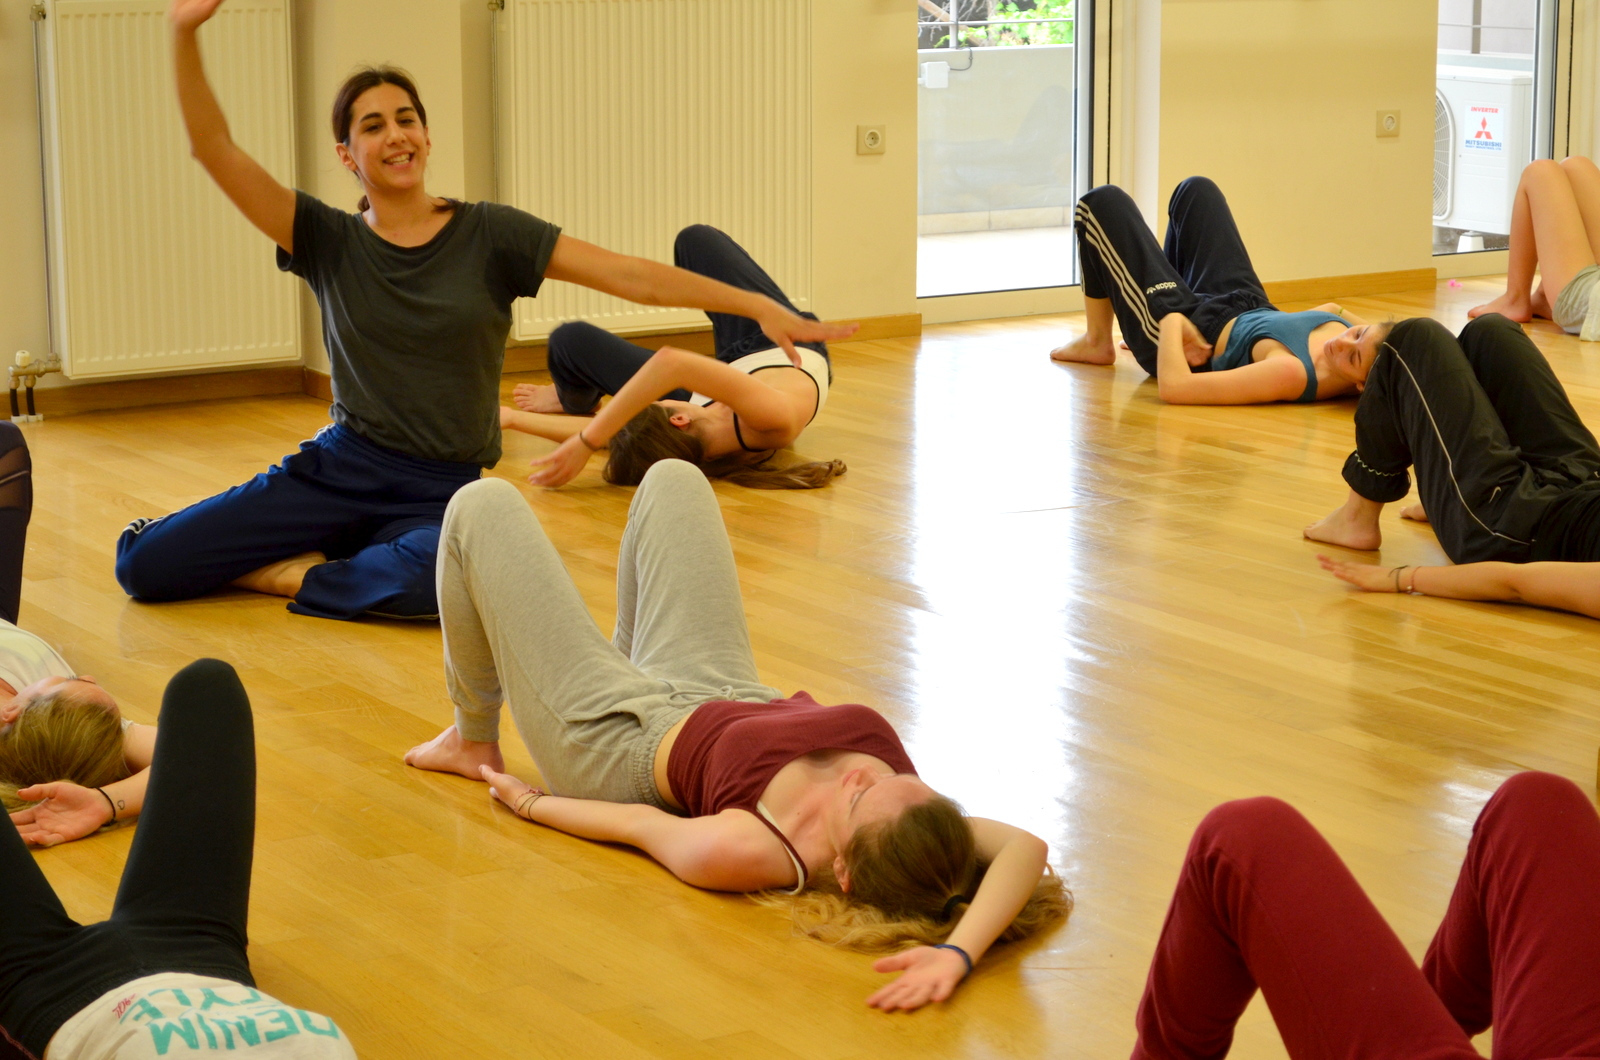 Contemporary dance workshop @CentralBallet with Zoi Efstathiou 05.05.2018 #1